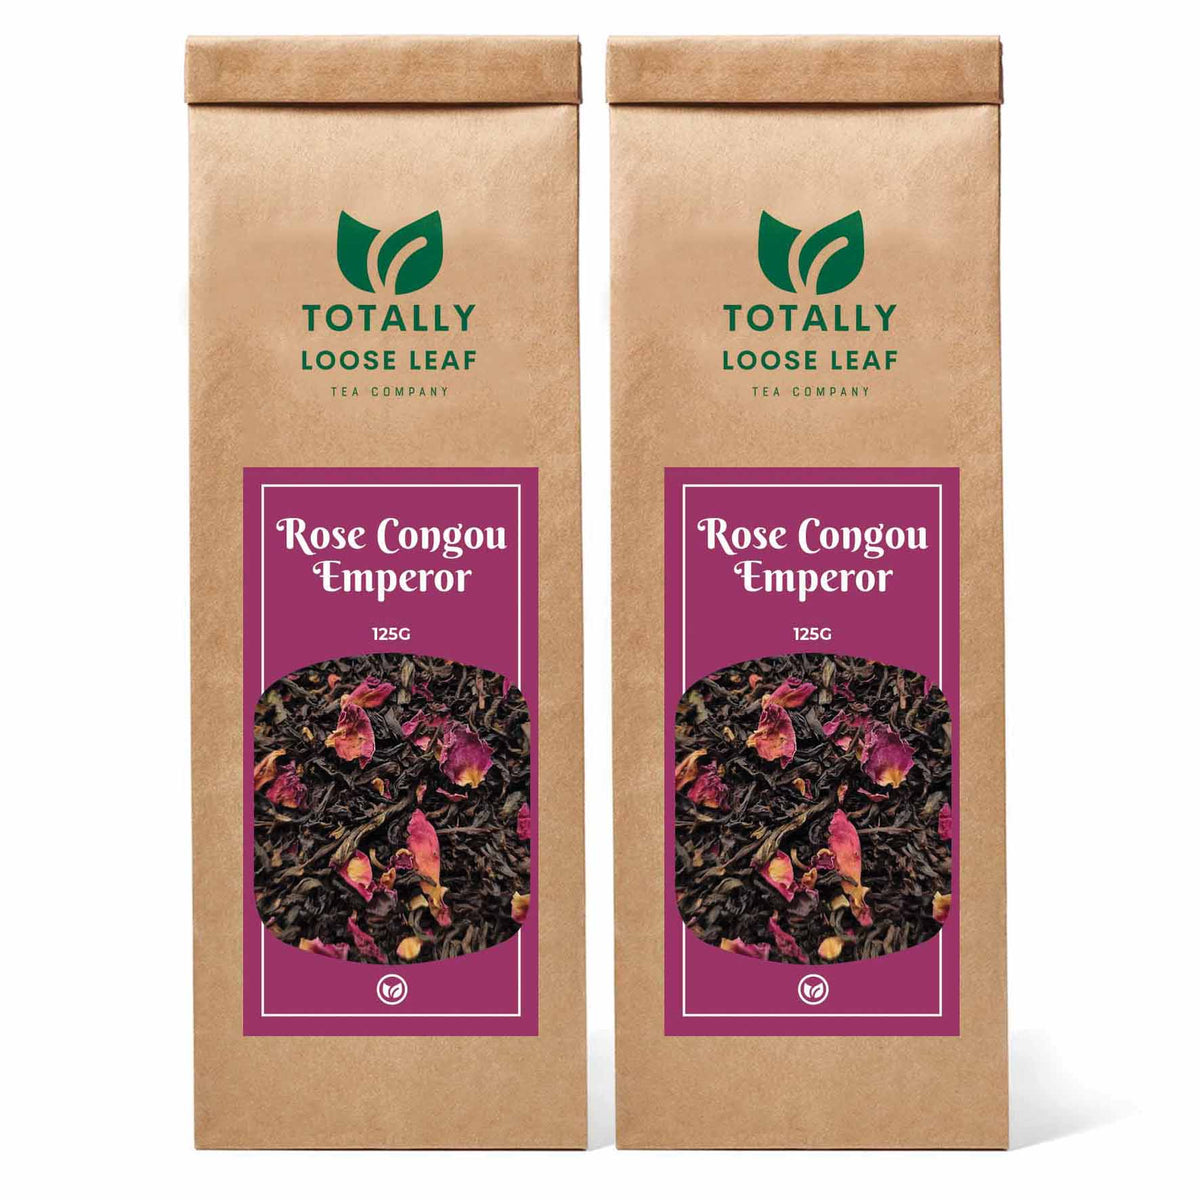 Rose Congou Emperor Afternoon Loose Leaf Tea - two pouches